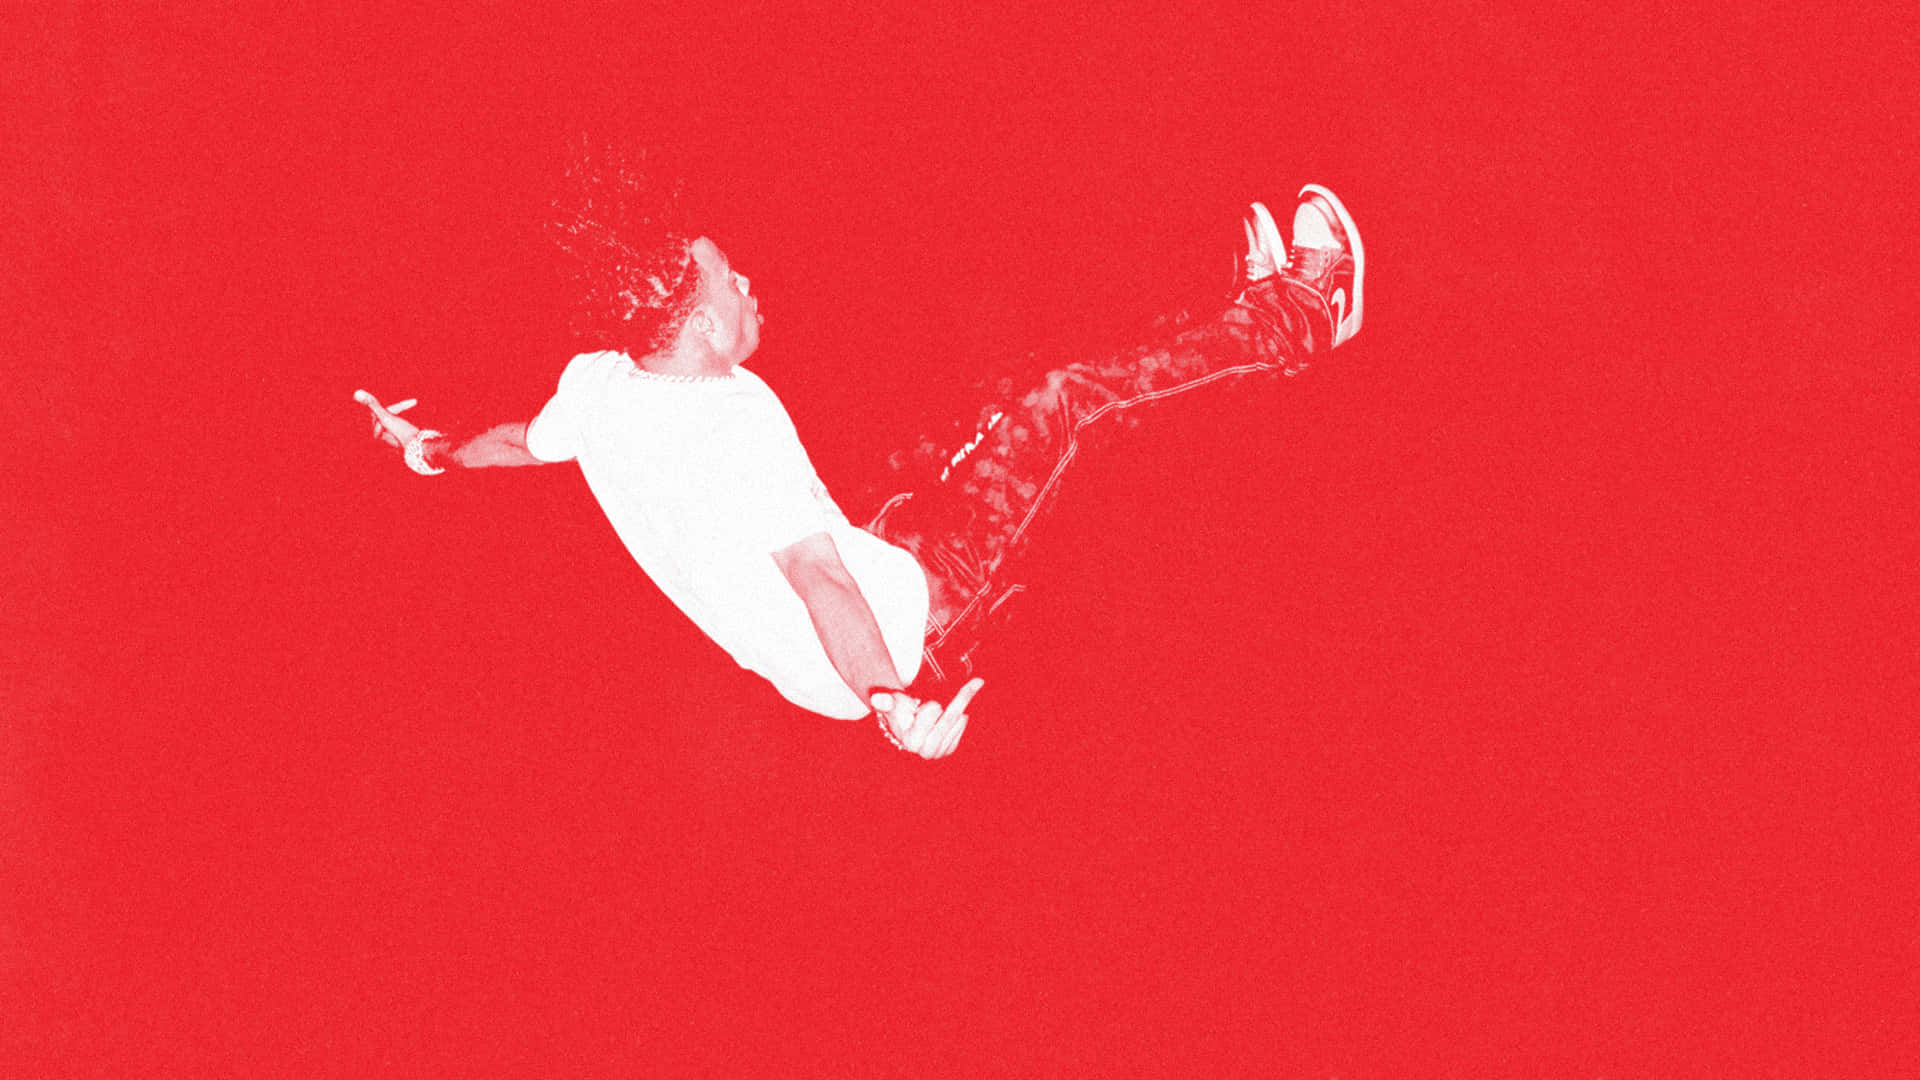 Electrifying Action - Carti in Mid-Air Wallpaper